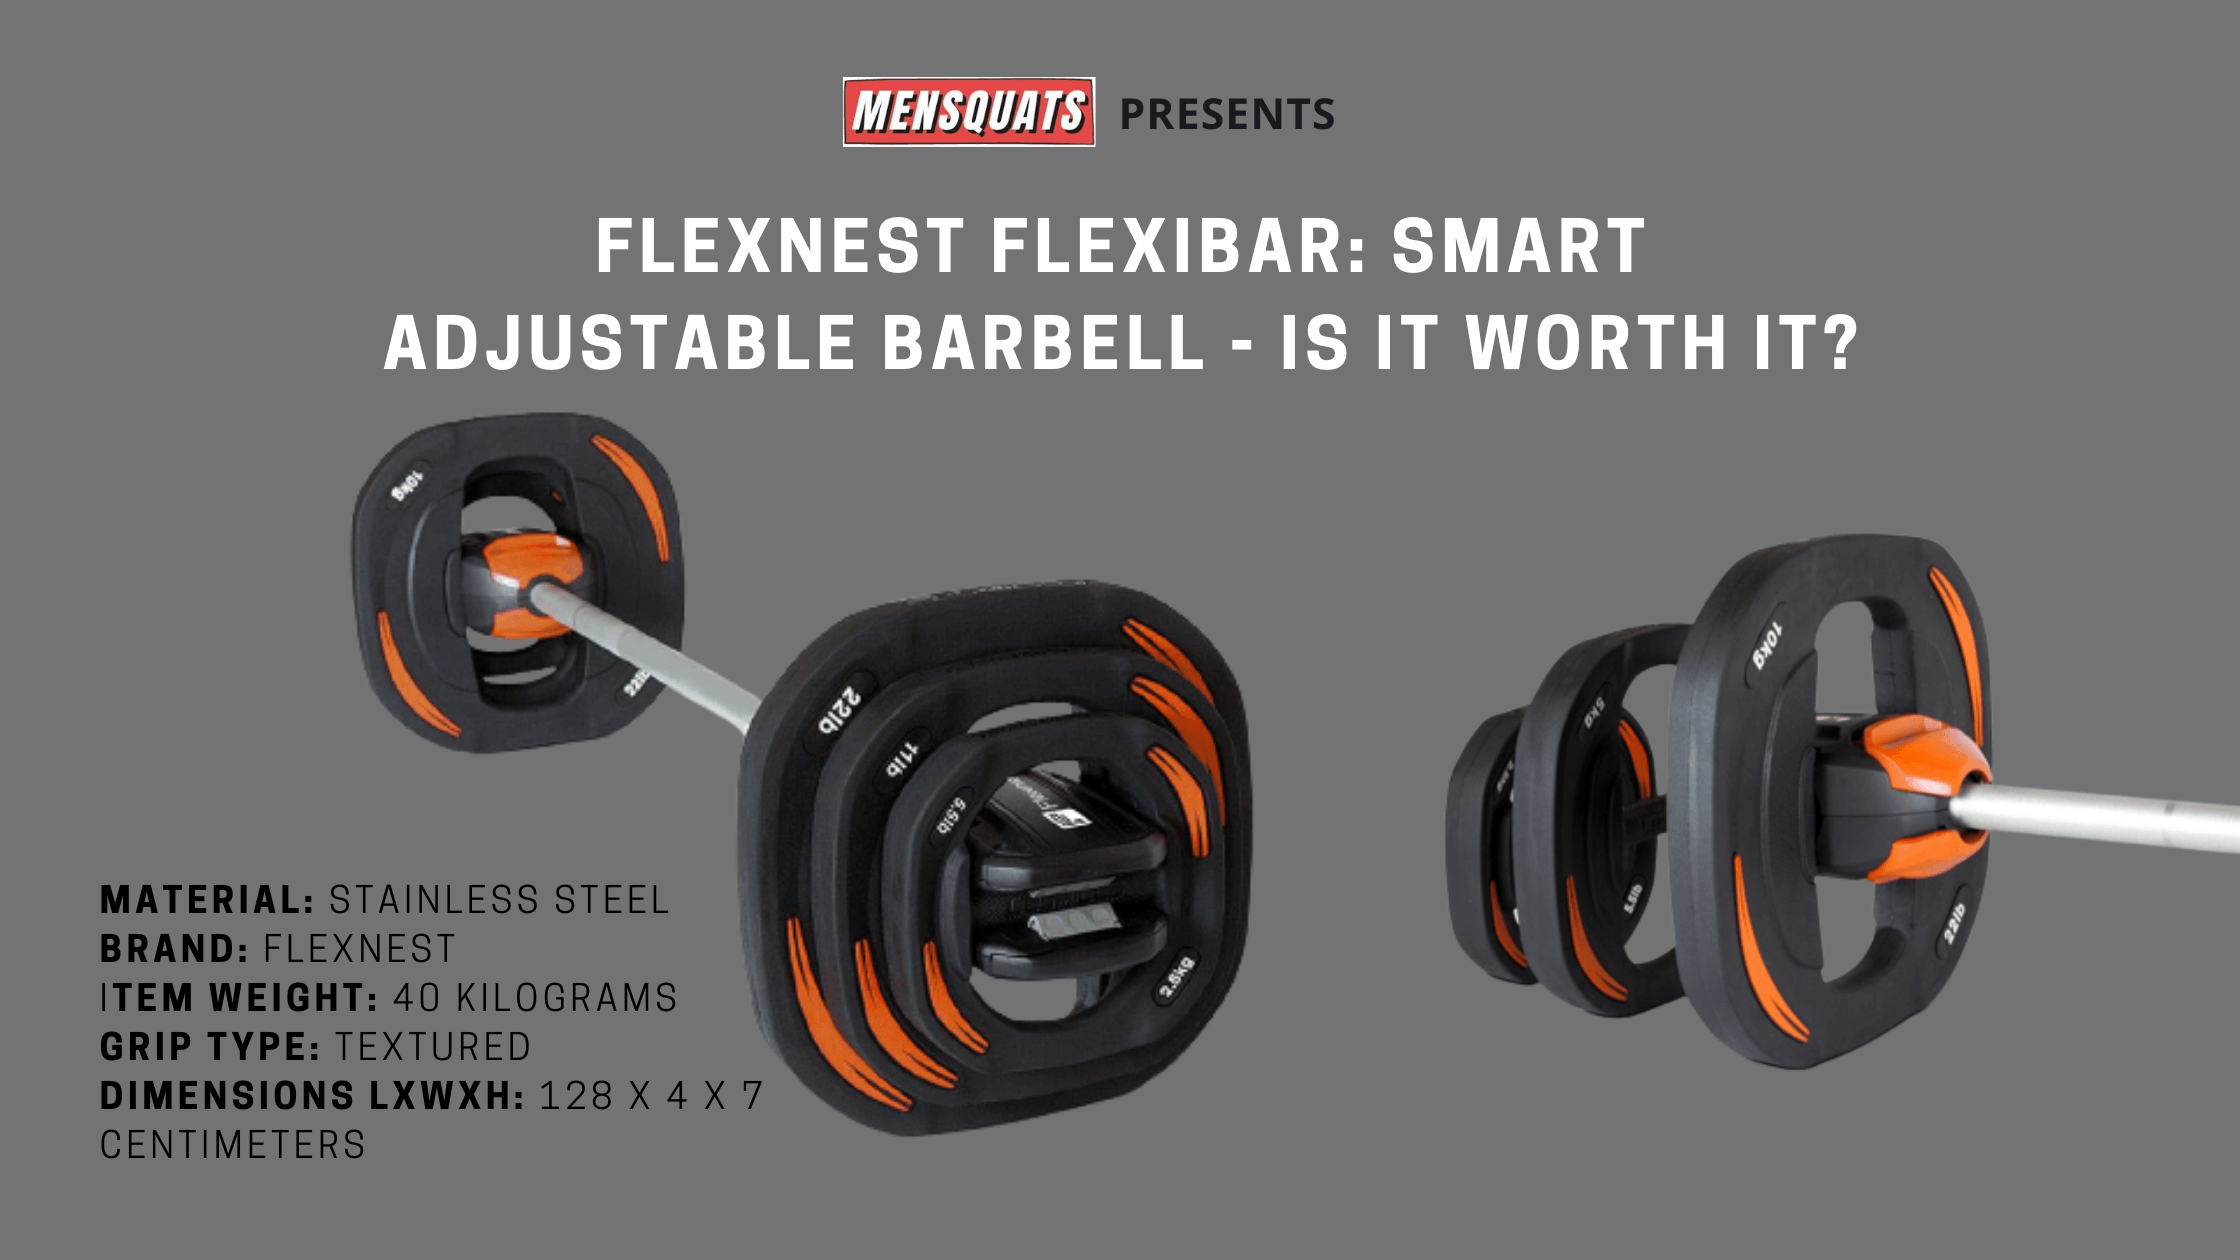 Flexnest-Flexibar-smart-adjustable-barbell-in-India-for-home-gym-Review-2022-Fully-explained